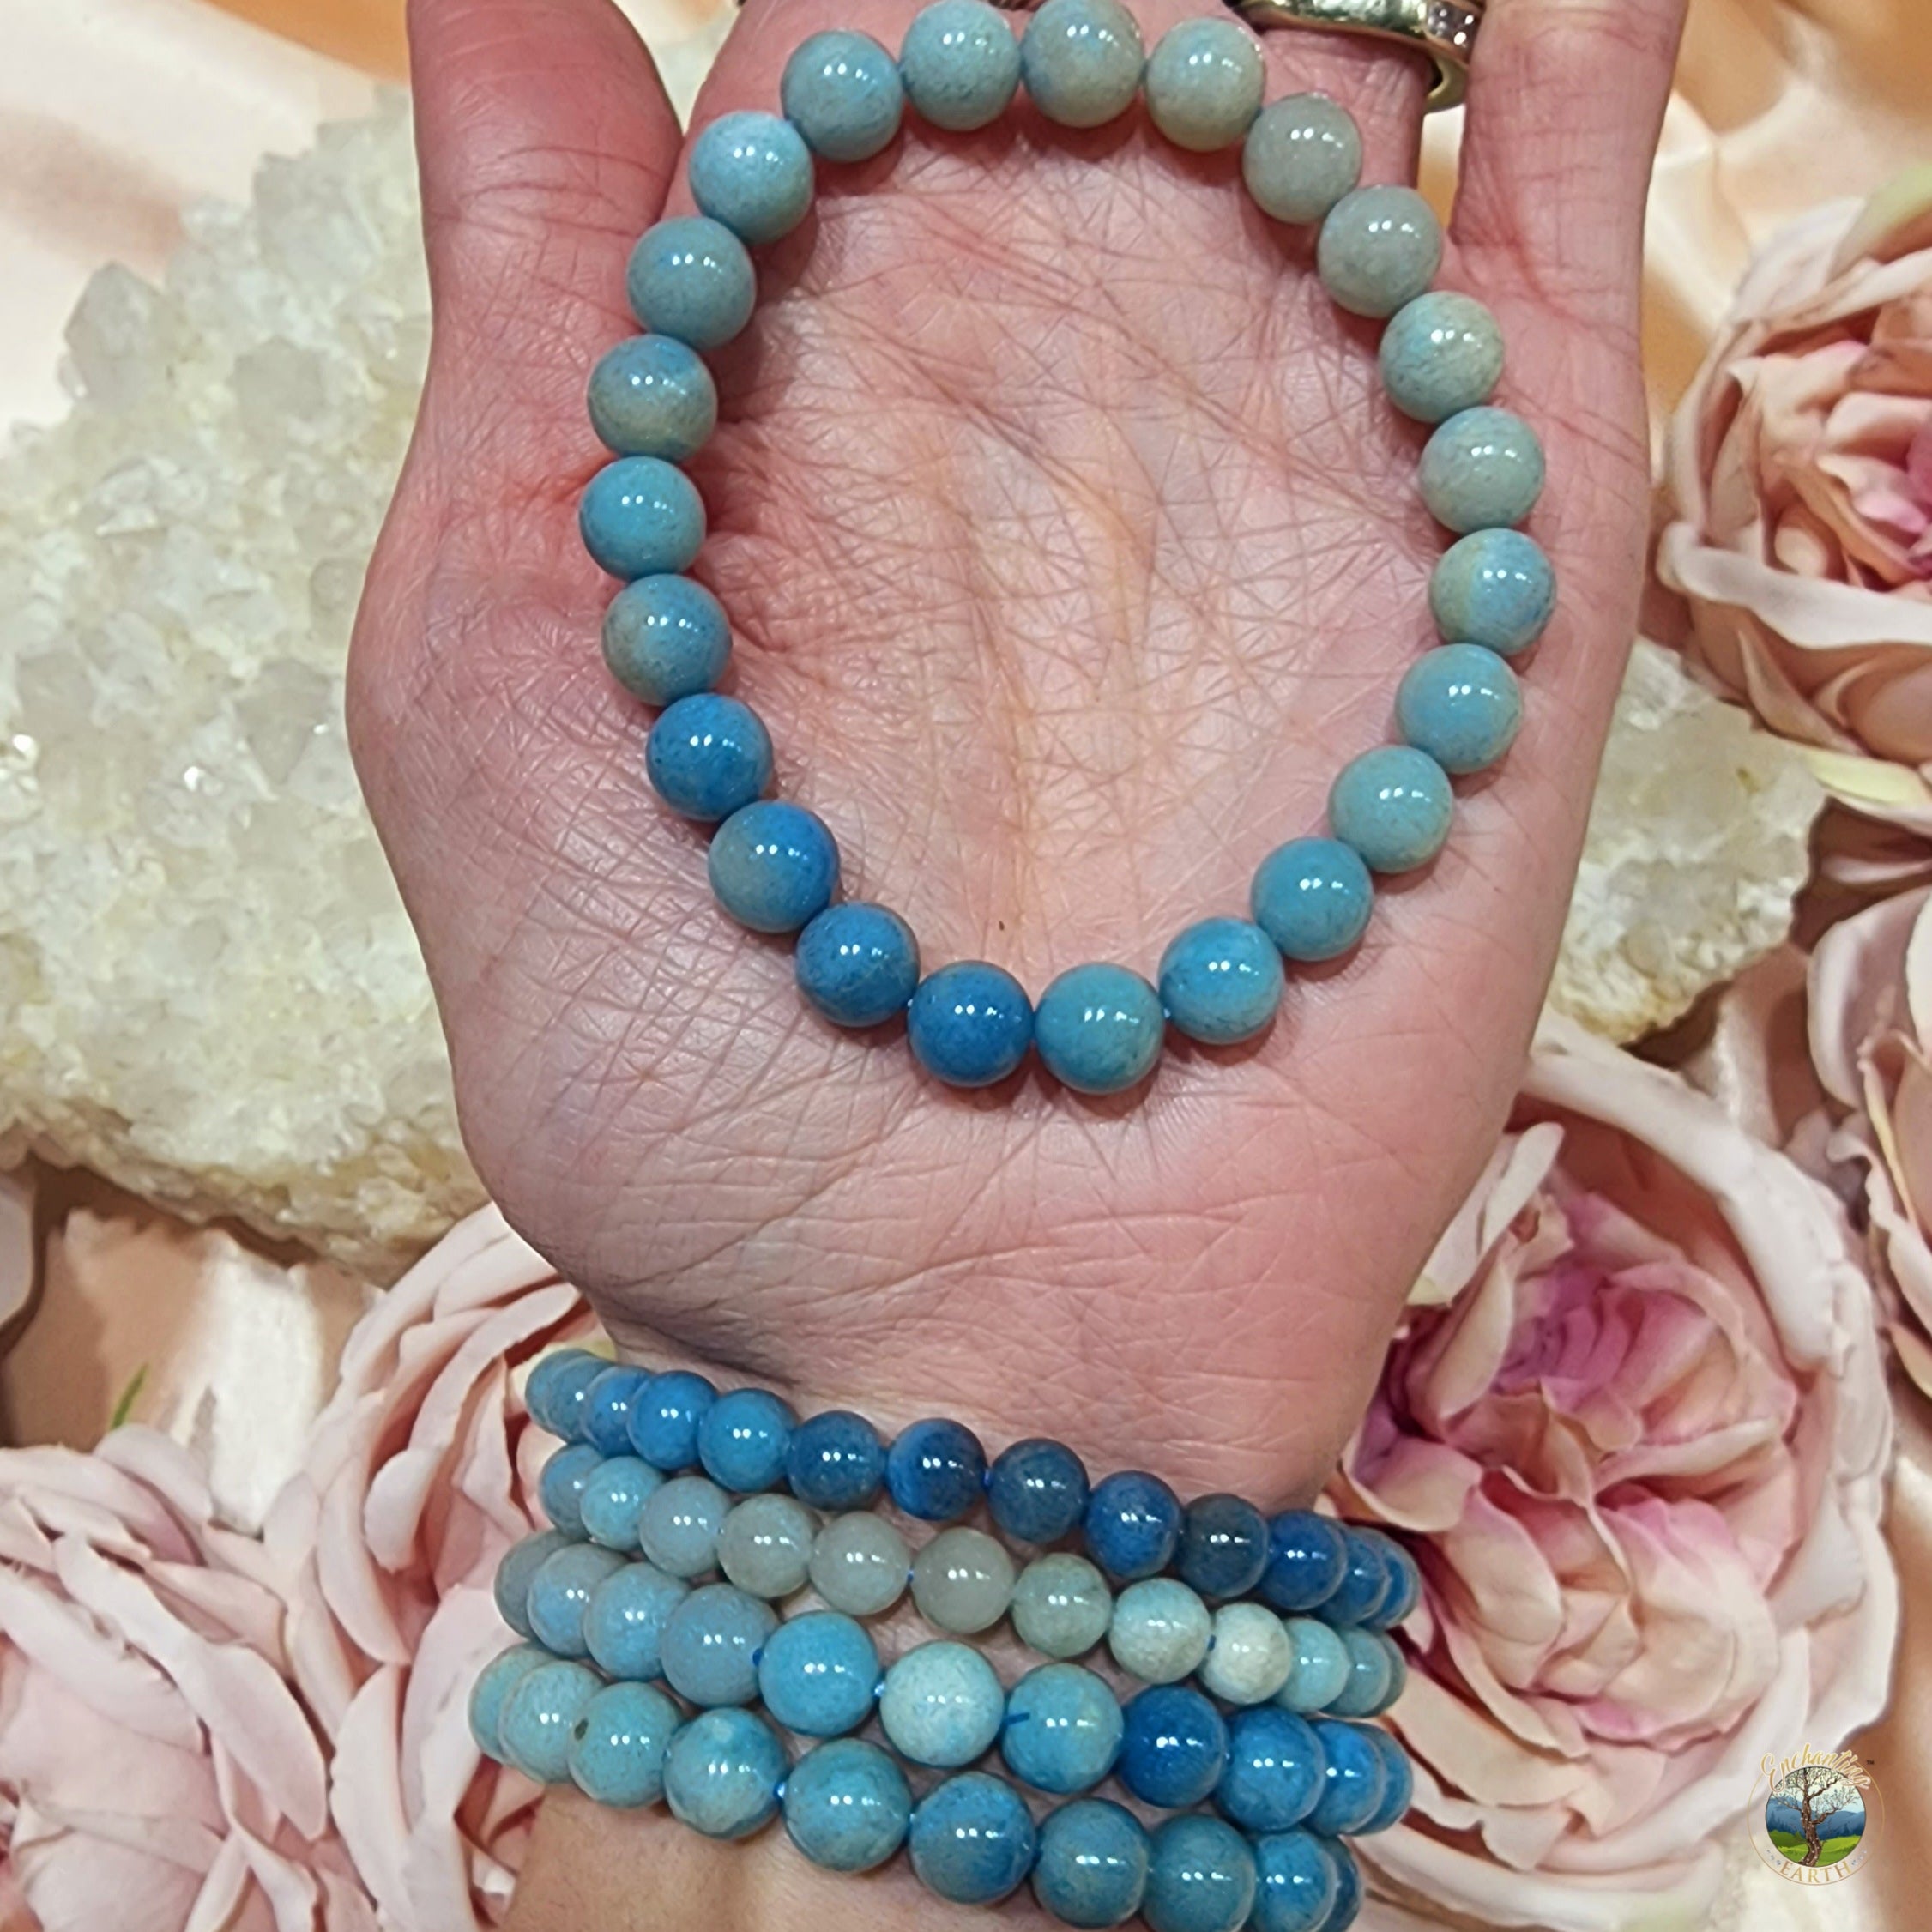 Trolleite Bracelet for Attracting your Desires and Finding your Life Path